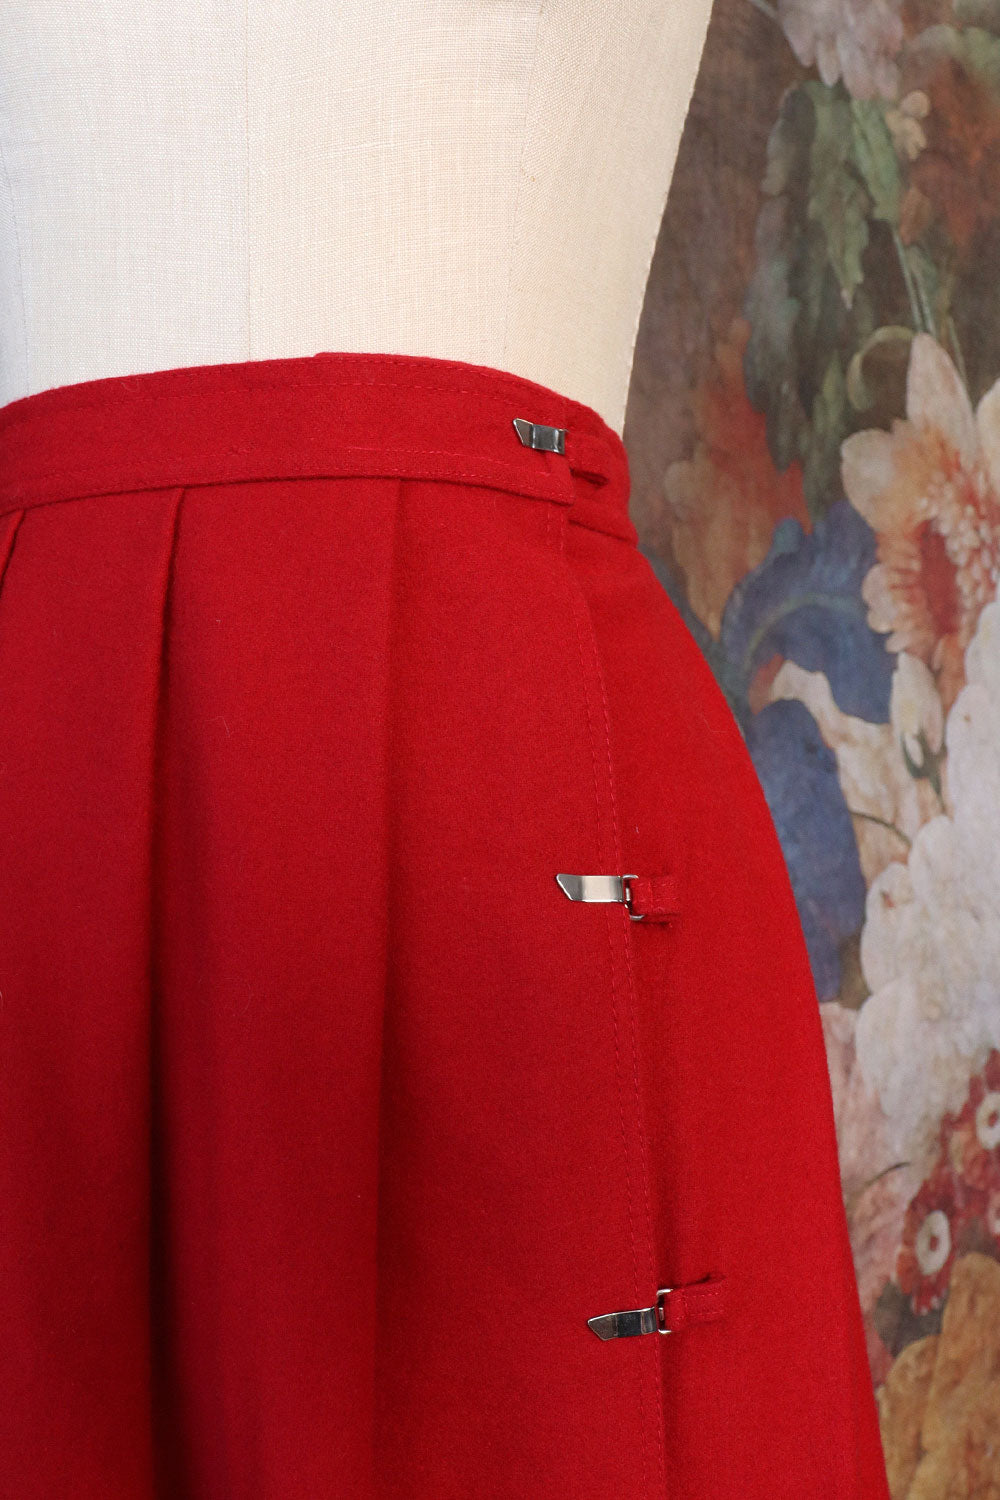 Cranberry Red Wool Pleat Skirt S